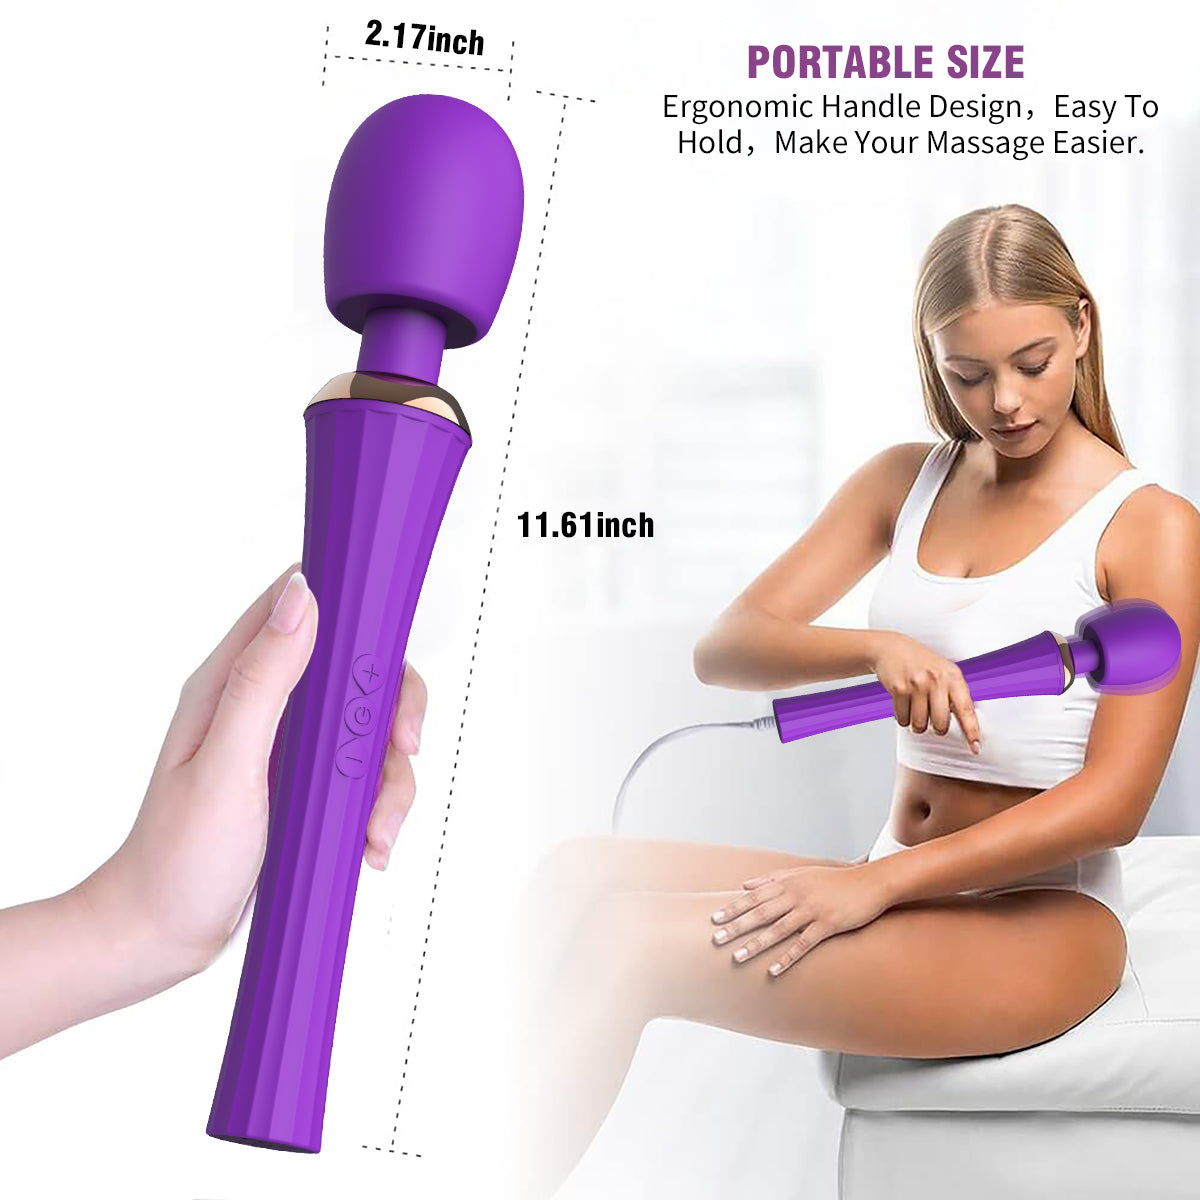 Rechargeable 5 Vibrating 3 Speed Personal Wand Massager